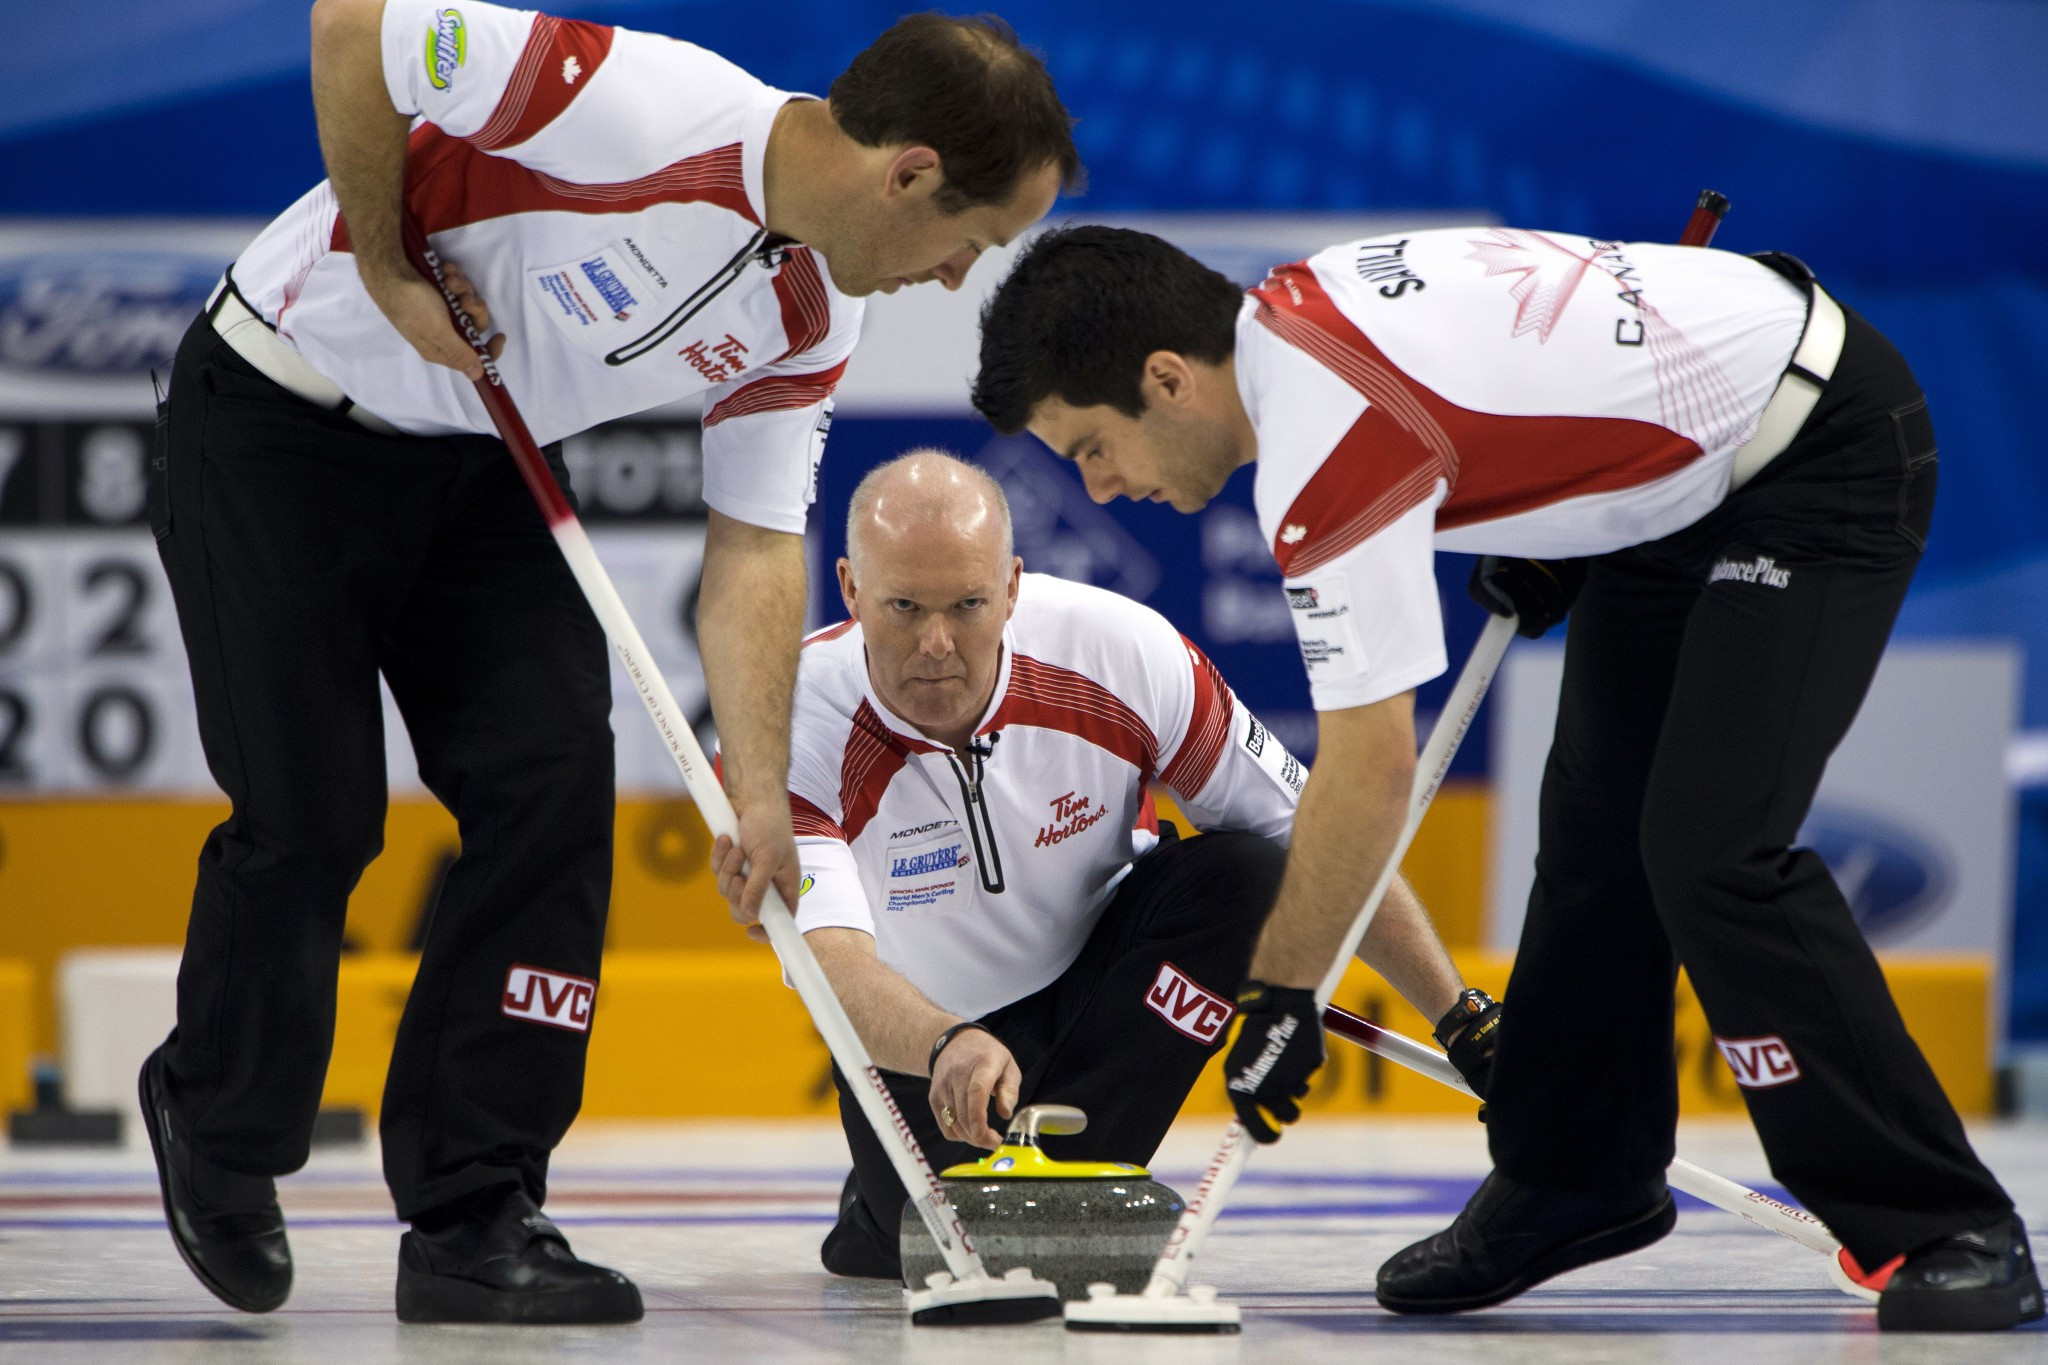 The deal means Canada will host a senior World Championship on an annual basis  ©Getty Images